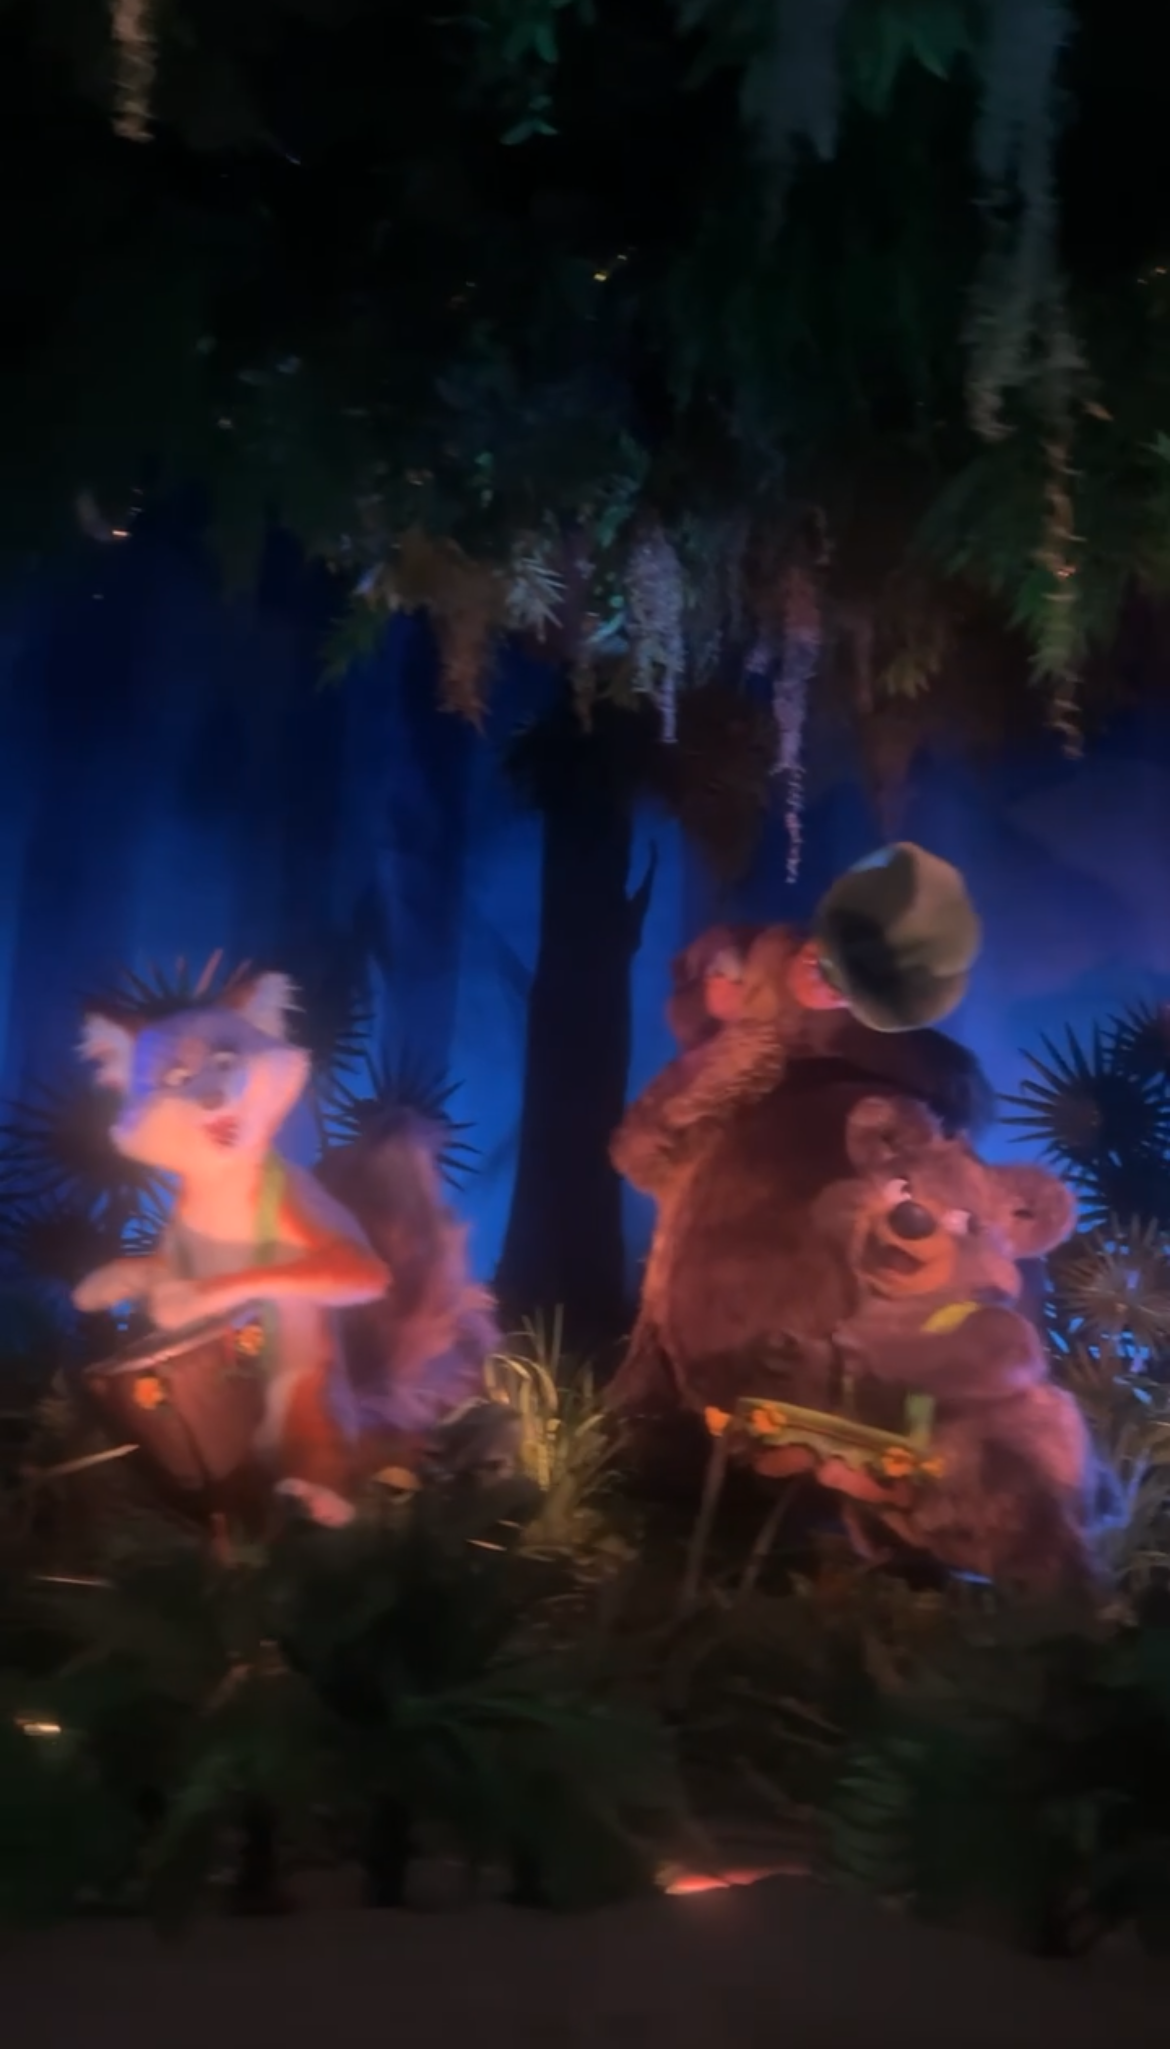 Animatronic scene from Disney&#x27;s Country Bear Jamboree featuring Henry, Liver Lips McGrowl, Teddi Barra, and Gomer performing in a forest setup